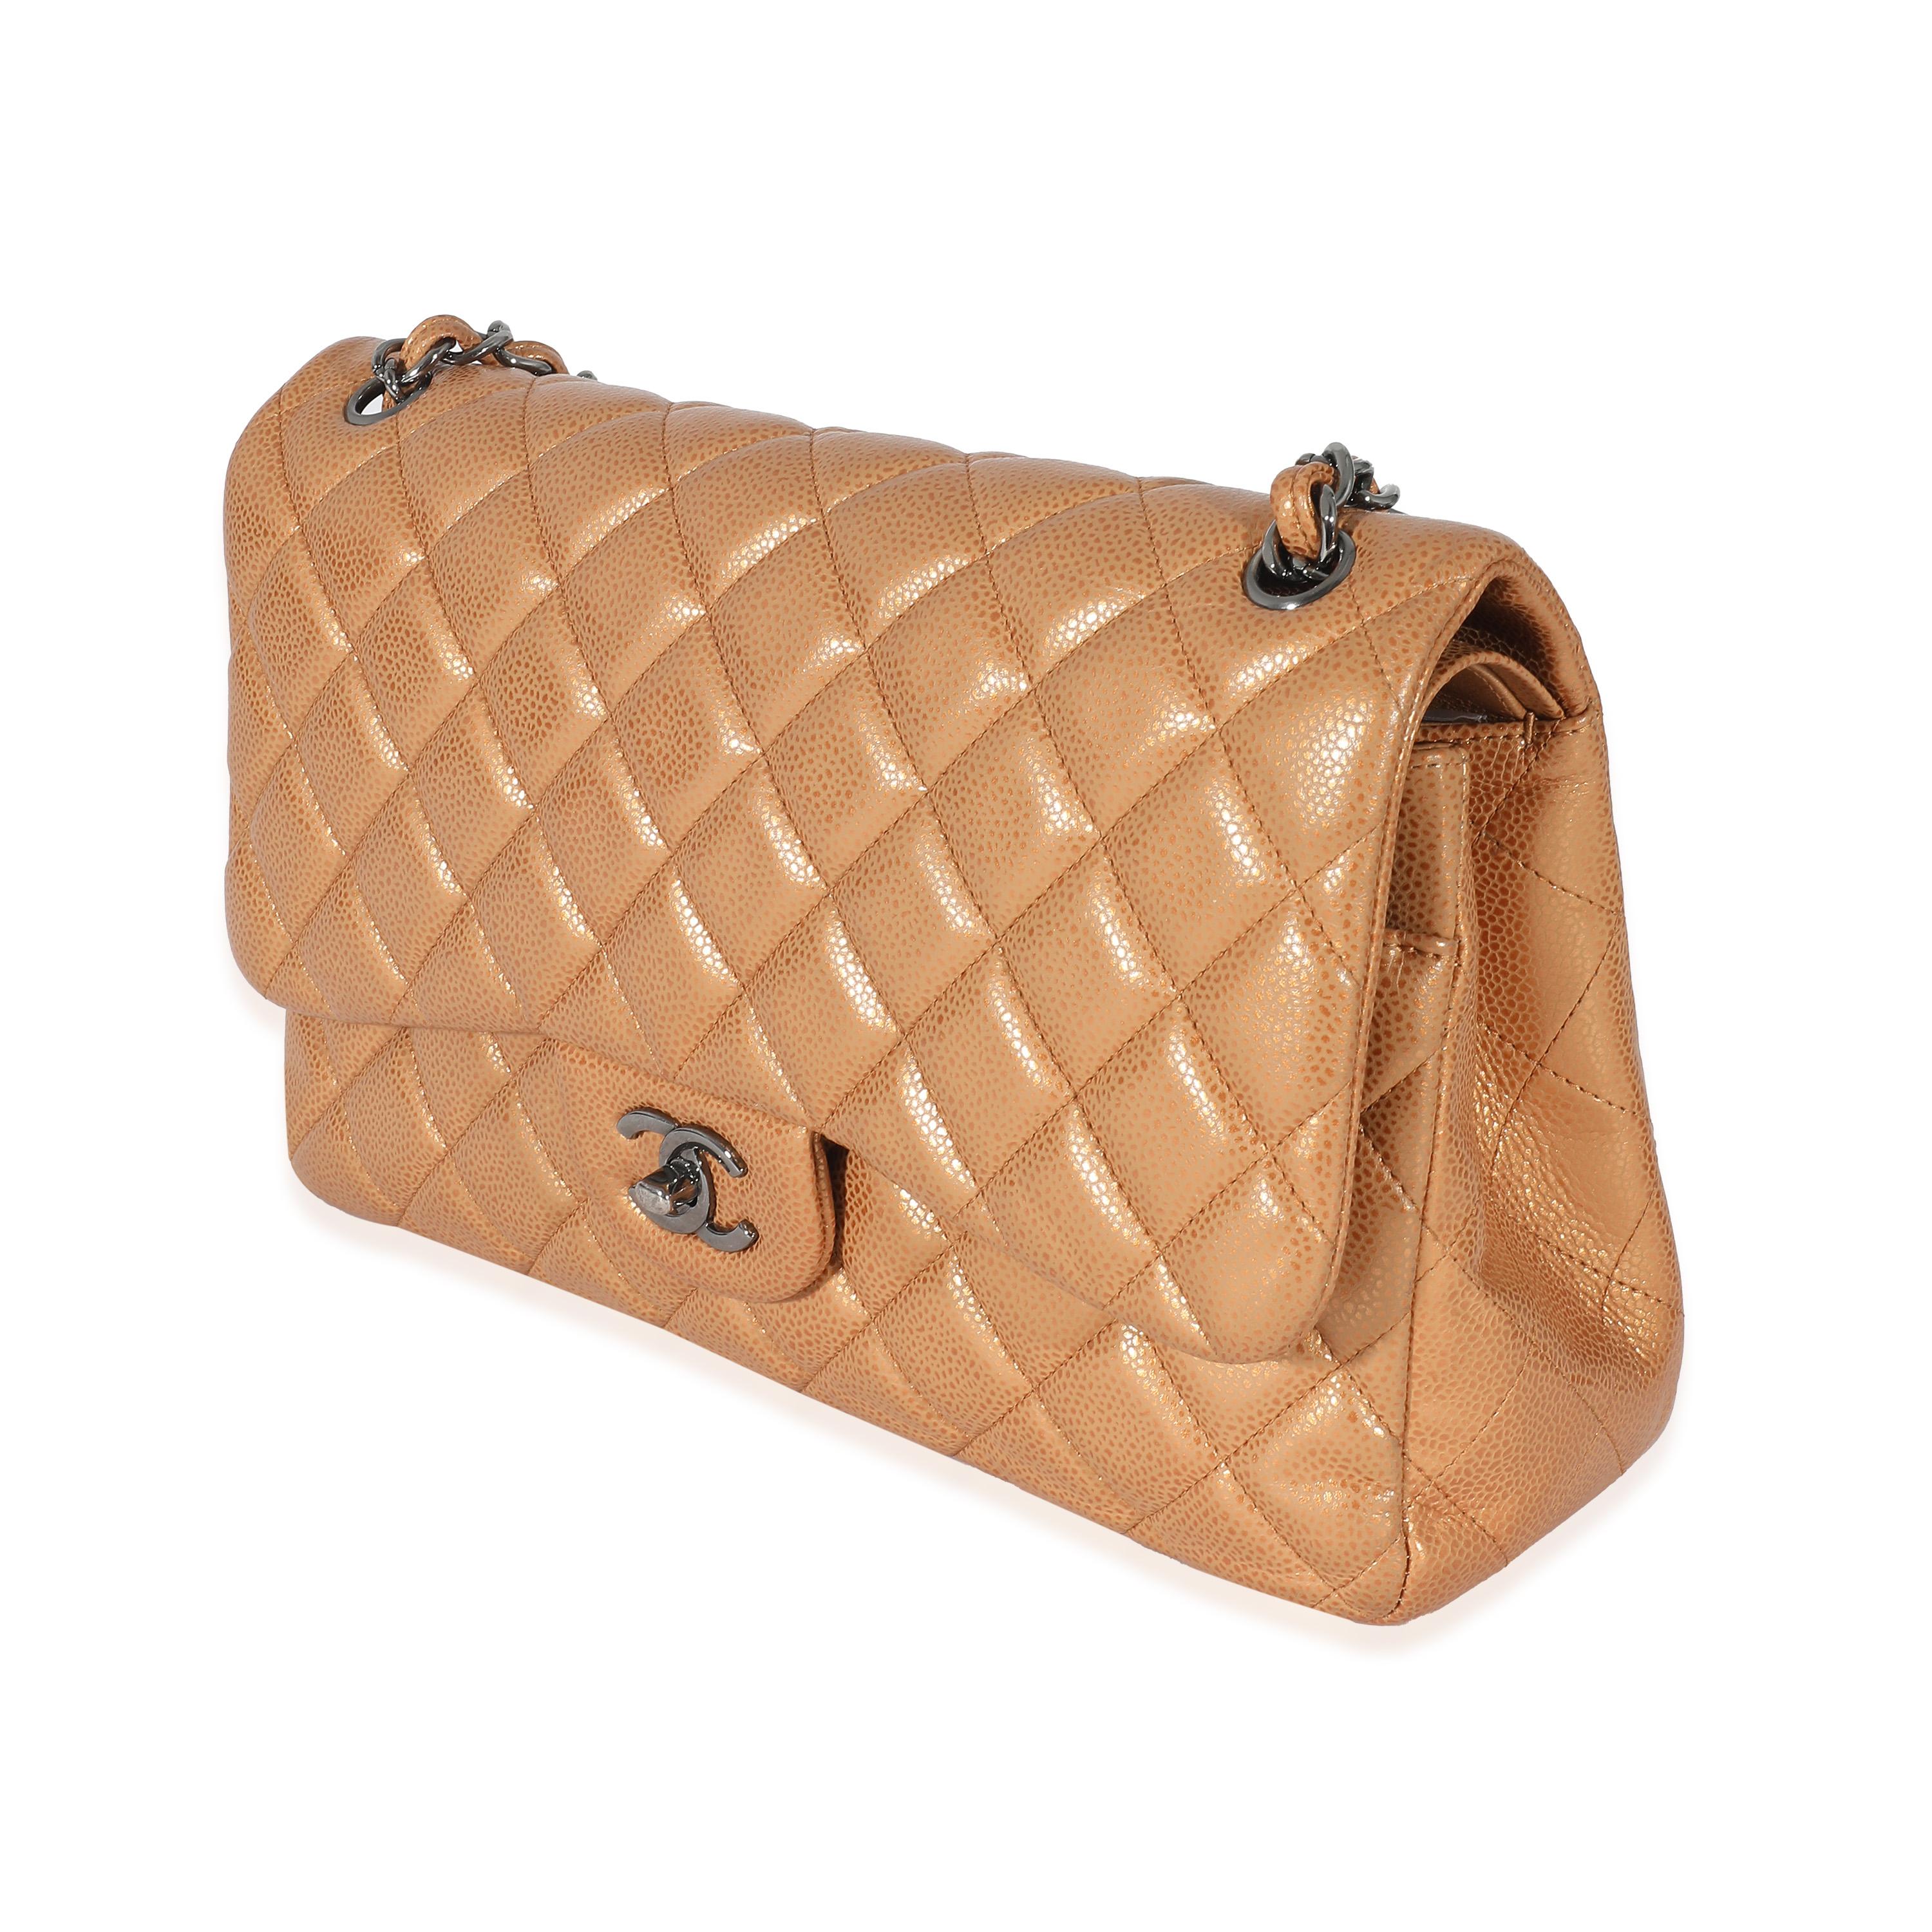 Chanel Gold Metallic Caviar Jumbo Double Flap Bag In Excellent Condition For Sale In New York, NY